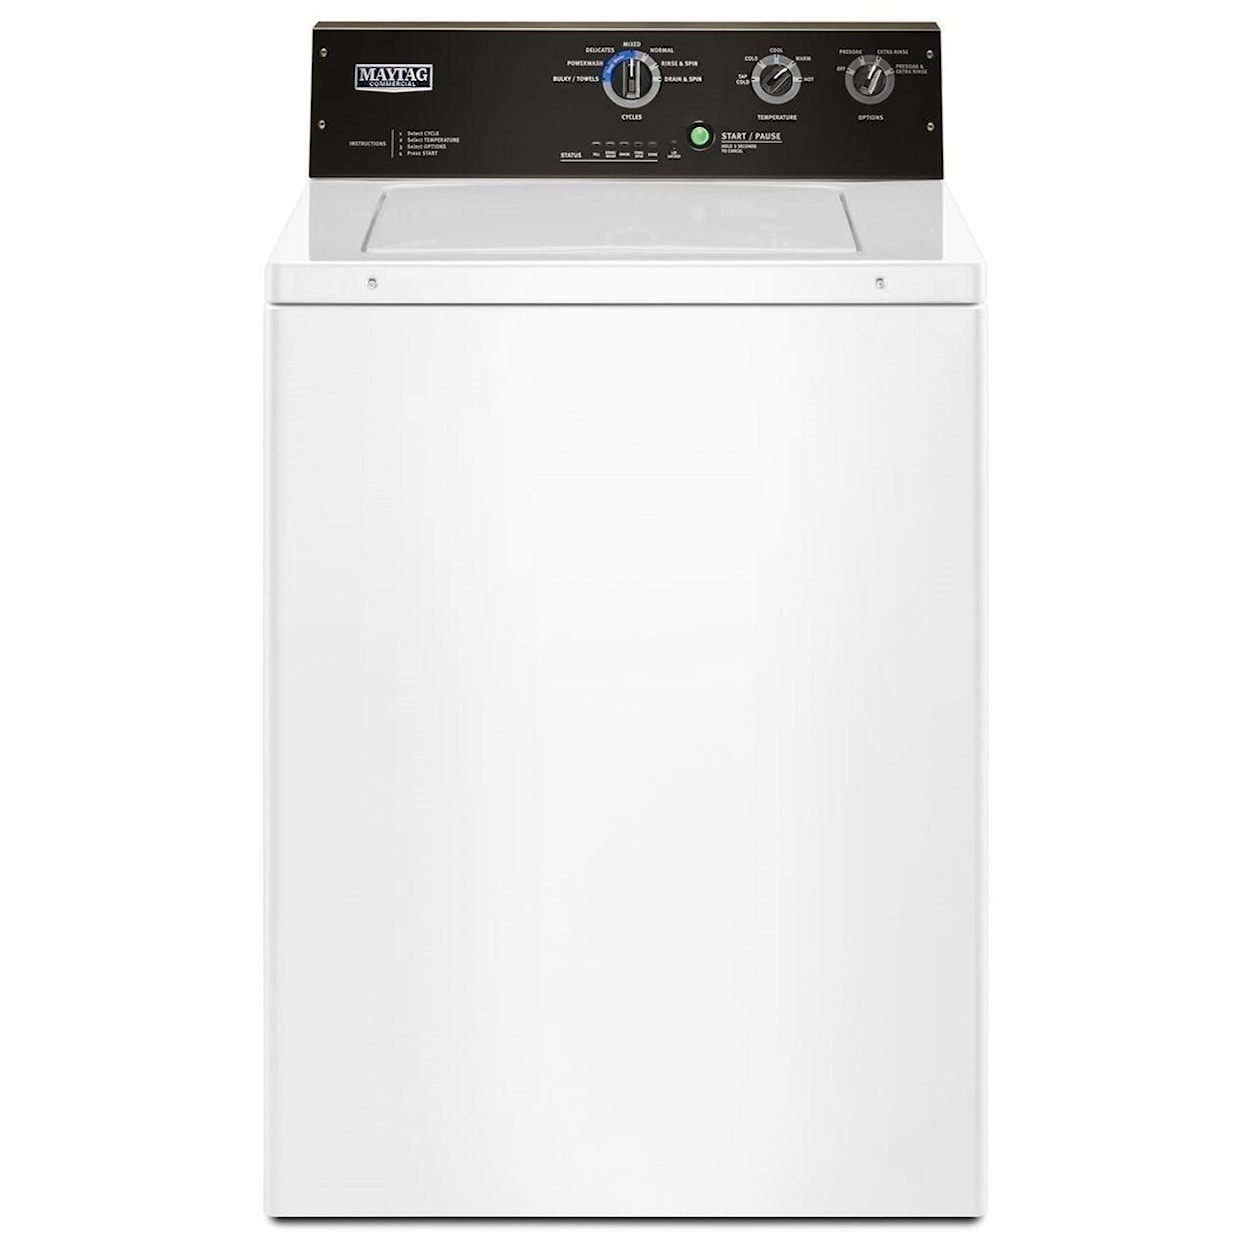 Maytag Top Load Washers 3.5 cu. ft. Commercial-Grade Residential Agi